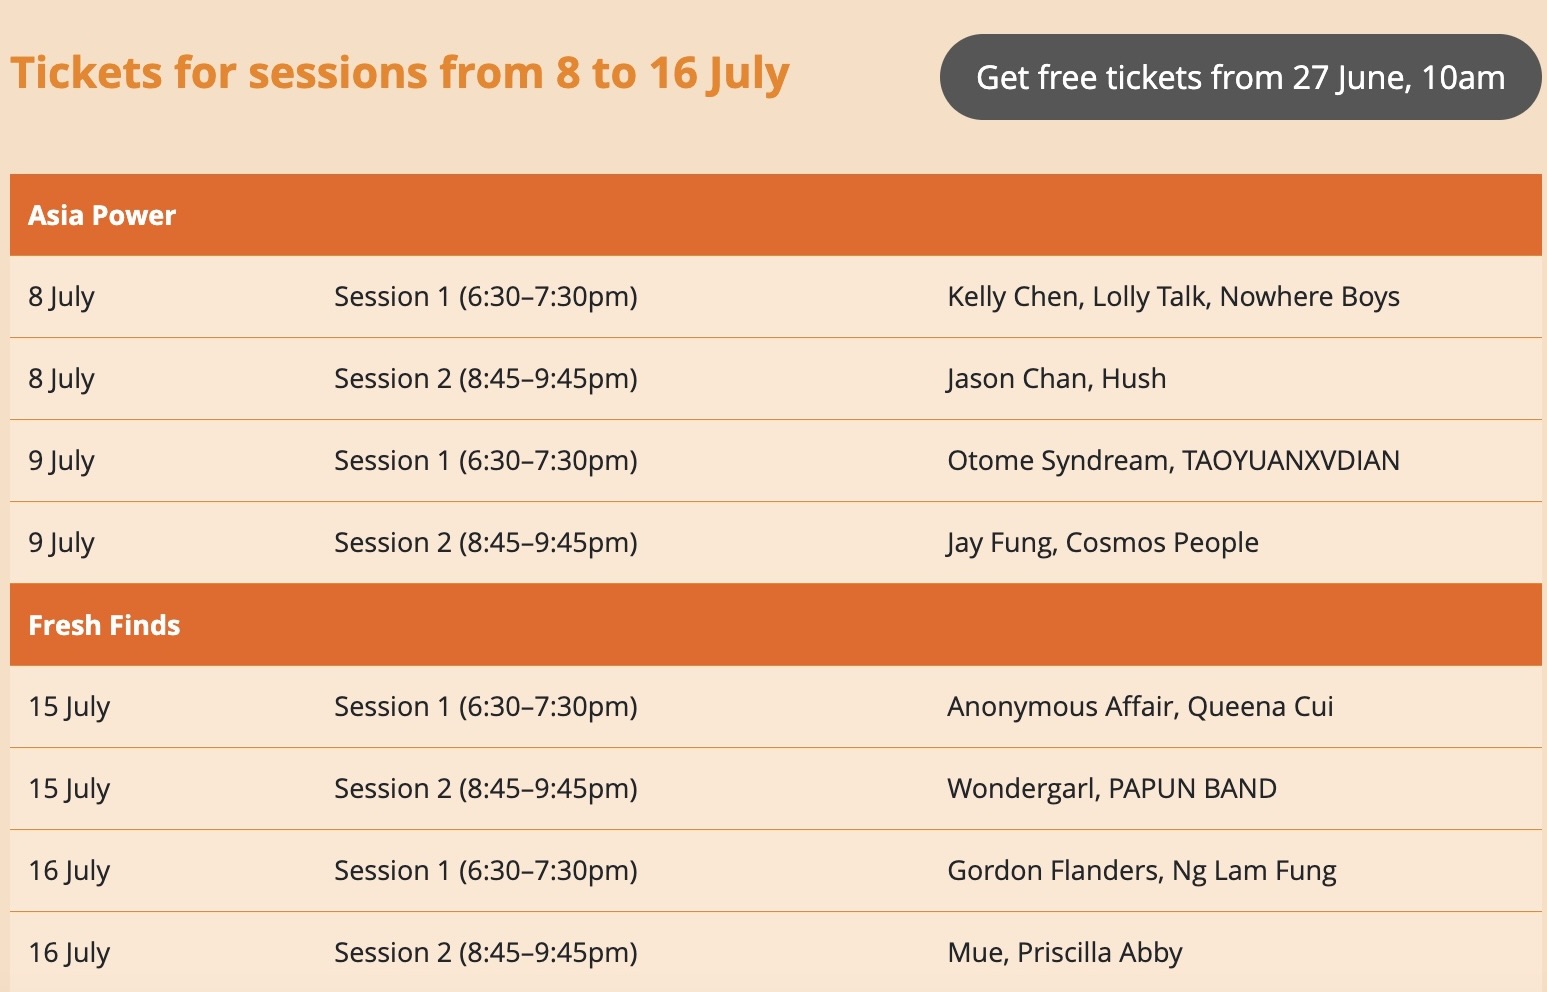 The schedule of concerts and ticket availability for July 8-16.